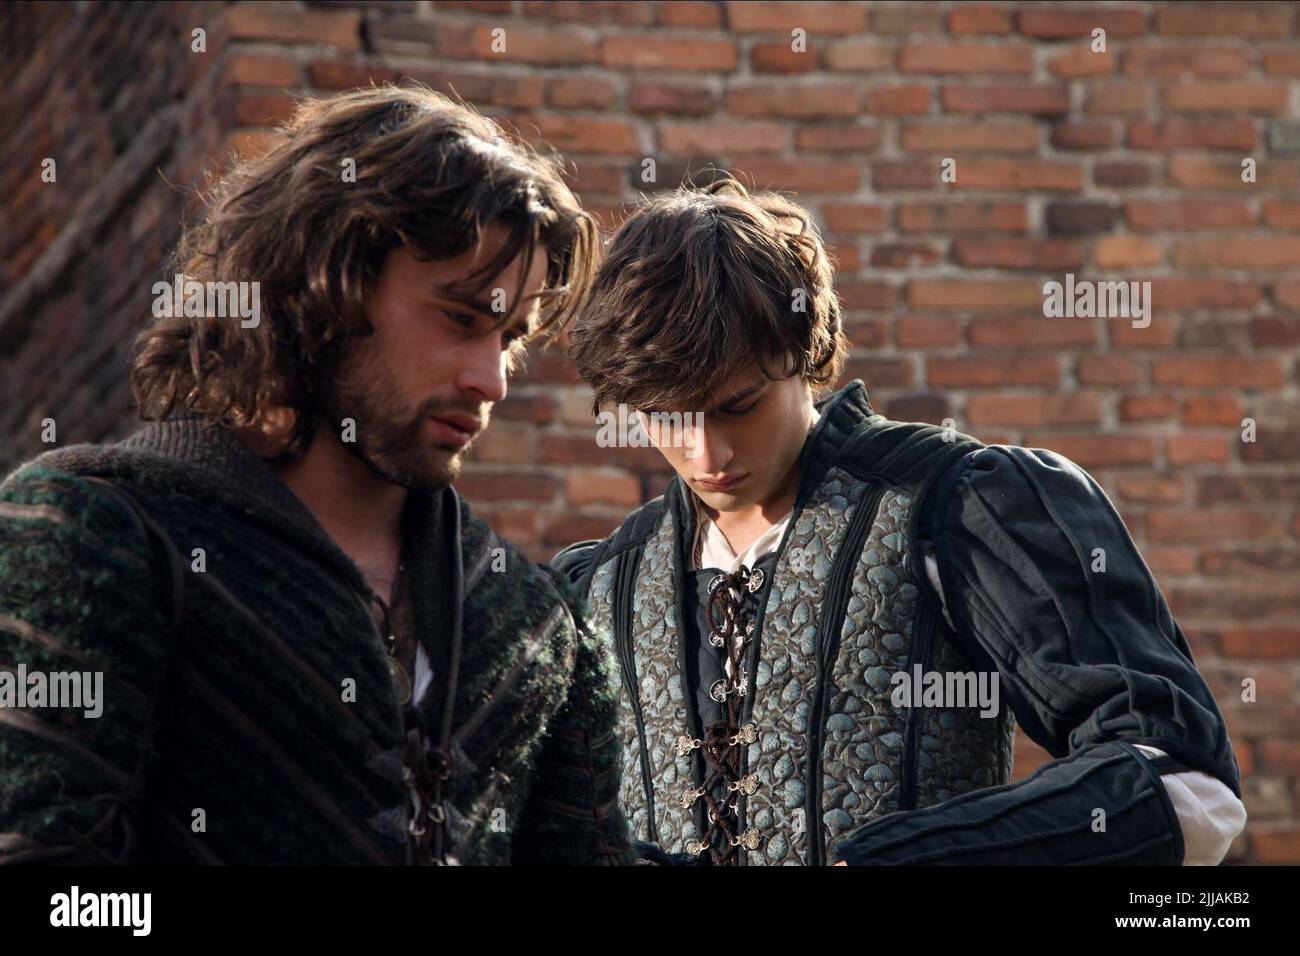 DOUGLAS BOOTH, CHRISTIAN COOKE, ROMEO AND JULIET, 2013 Stock Photo